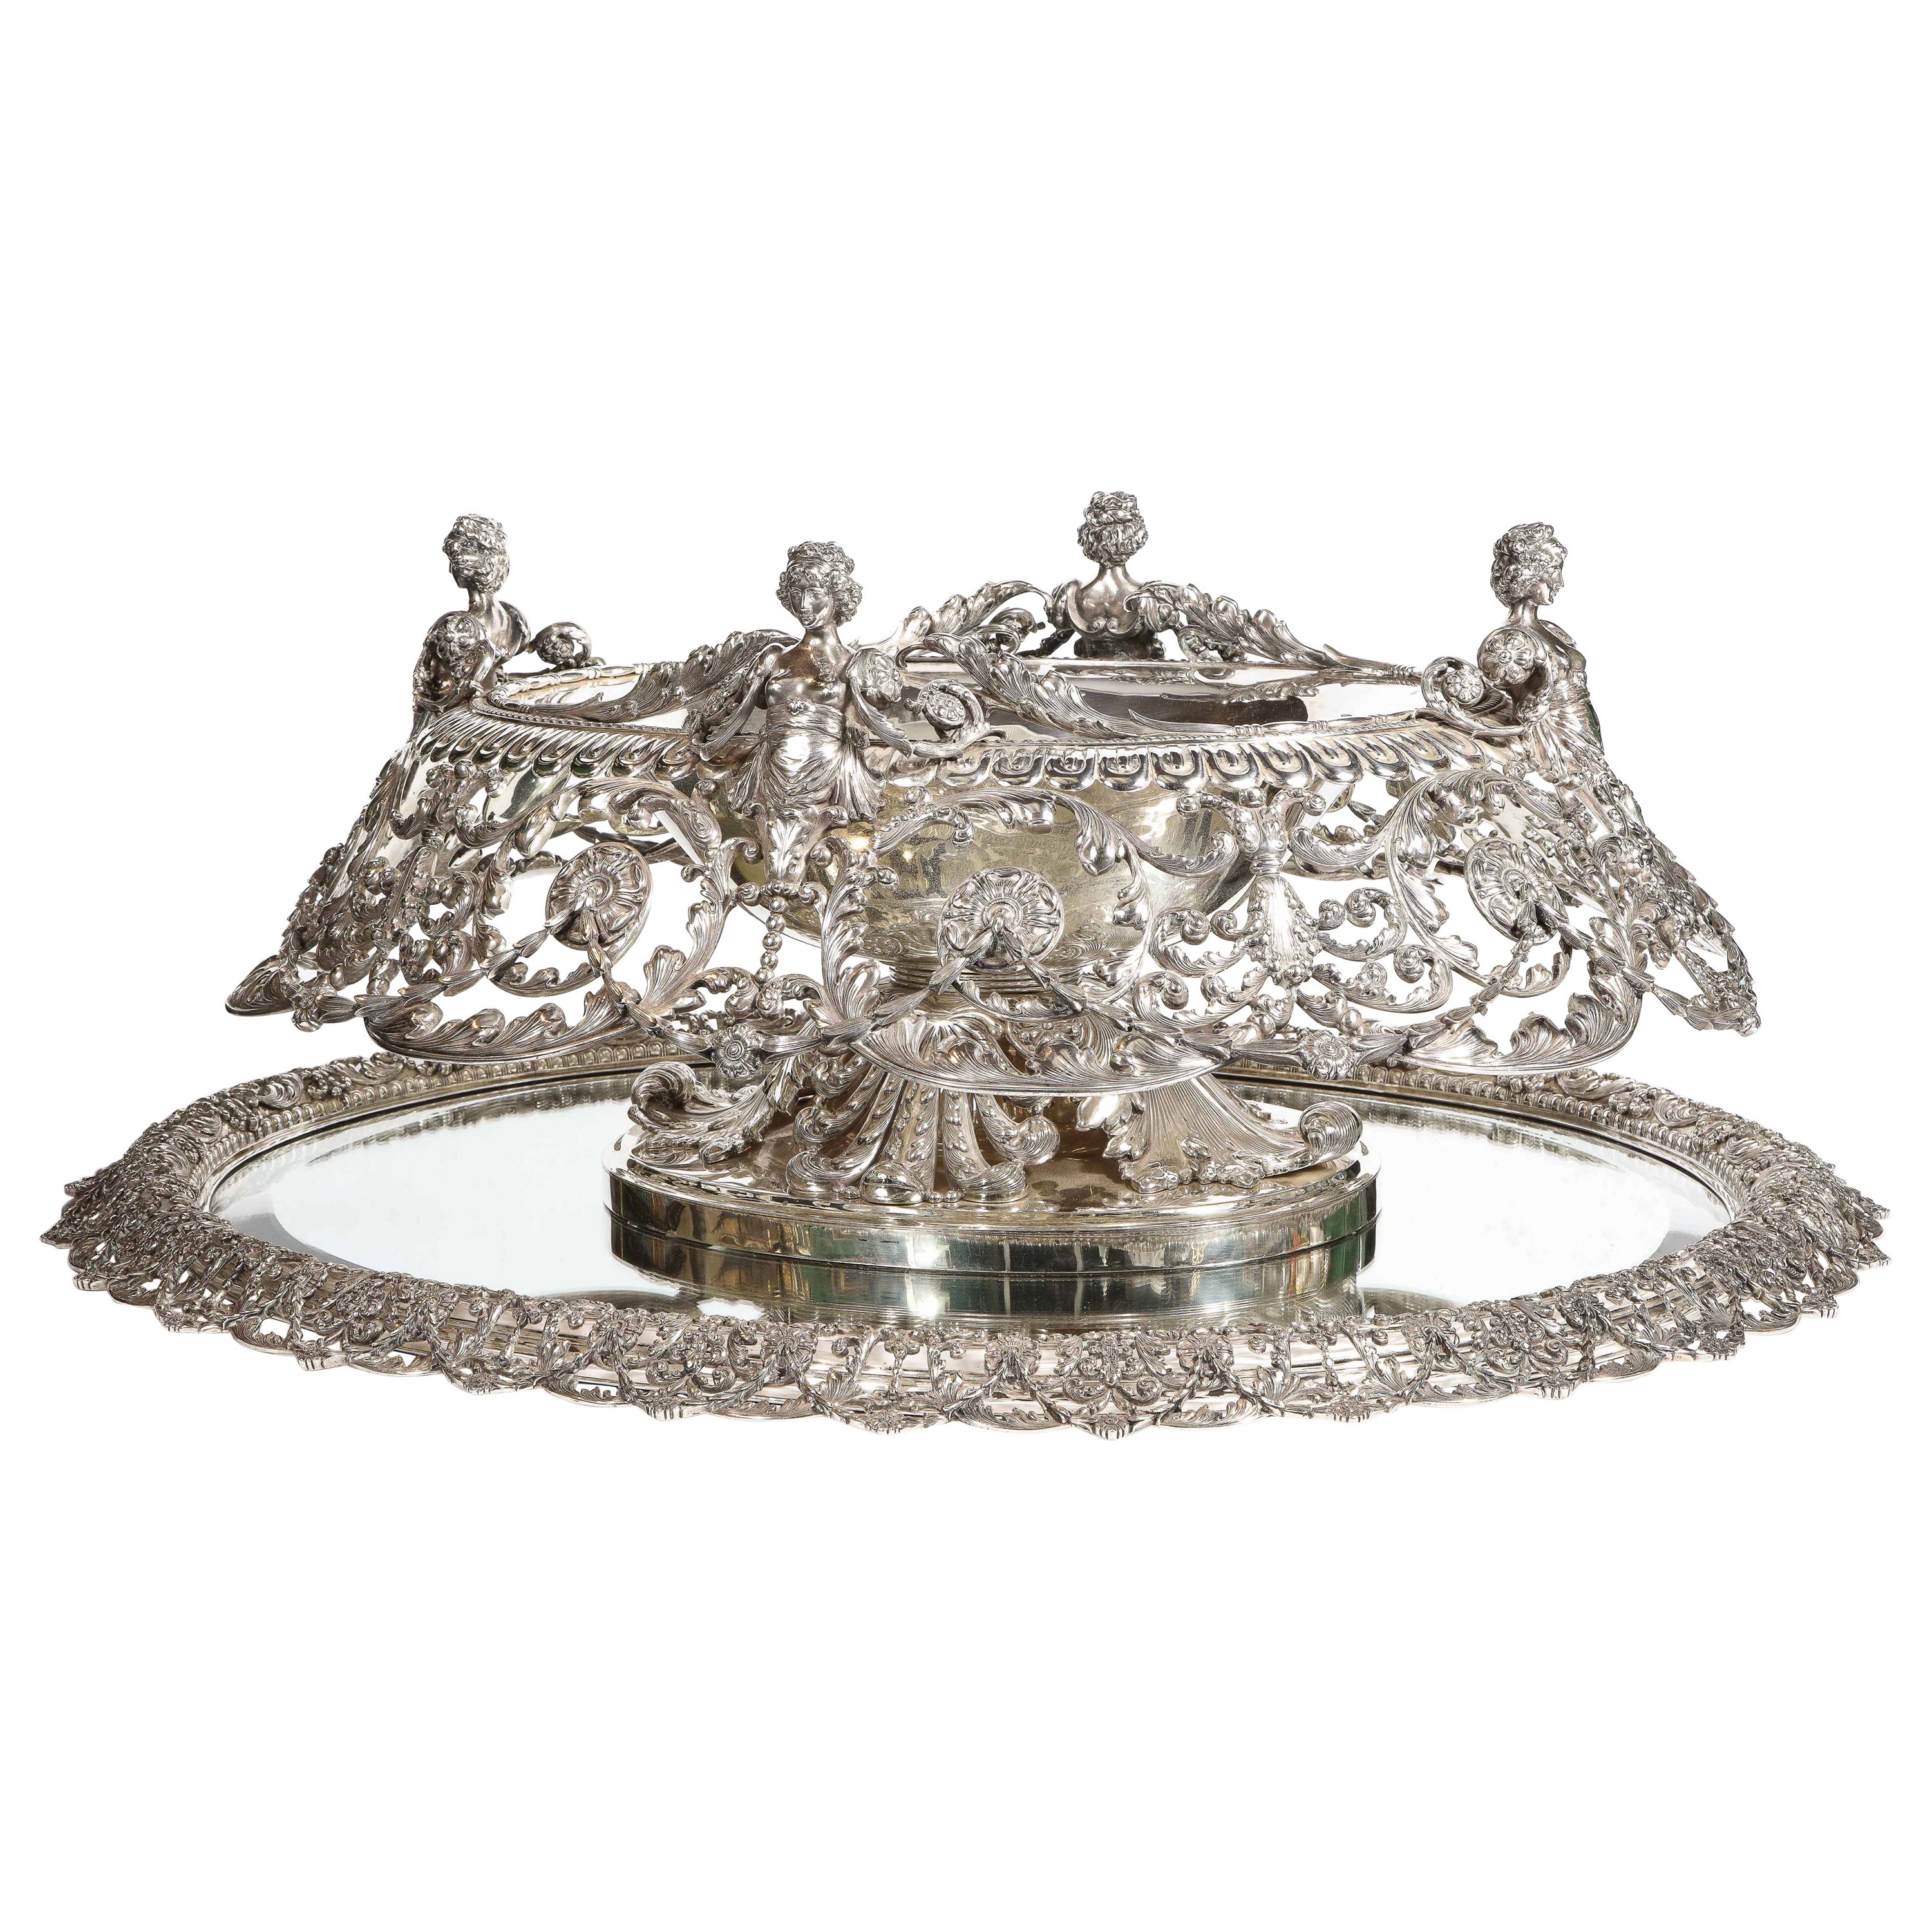 Tiffany & Company and George Paulding Farnham, A rare, lavish and monumental sterling silver centerpiece with original mirrored-glass sterling silver plateau, circa 1900.

Museum quality. 

In the George III style, designed by Paulding Farnham for